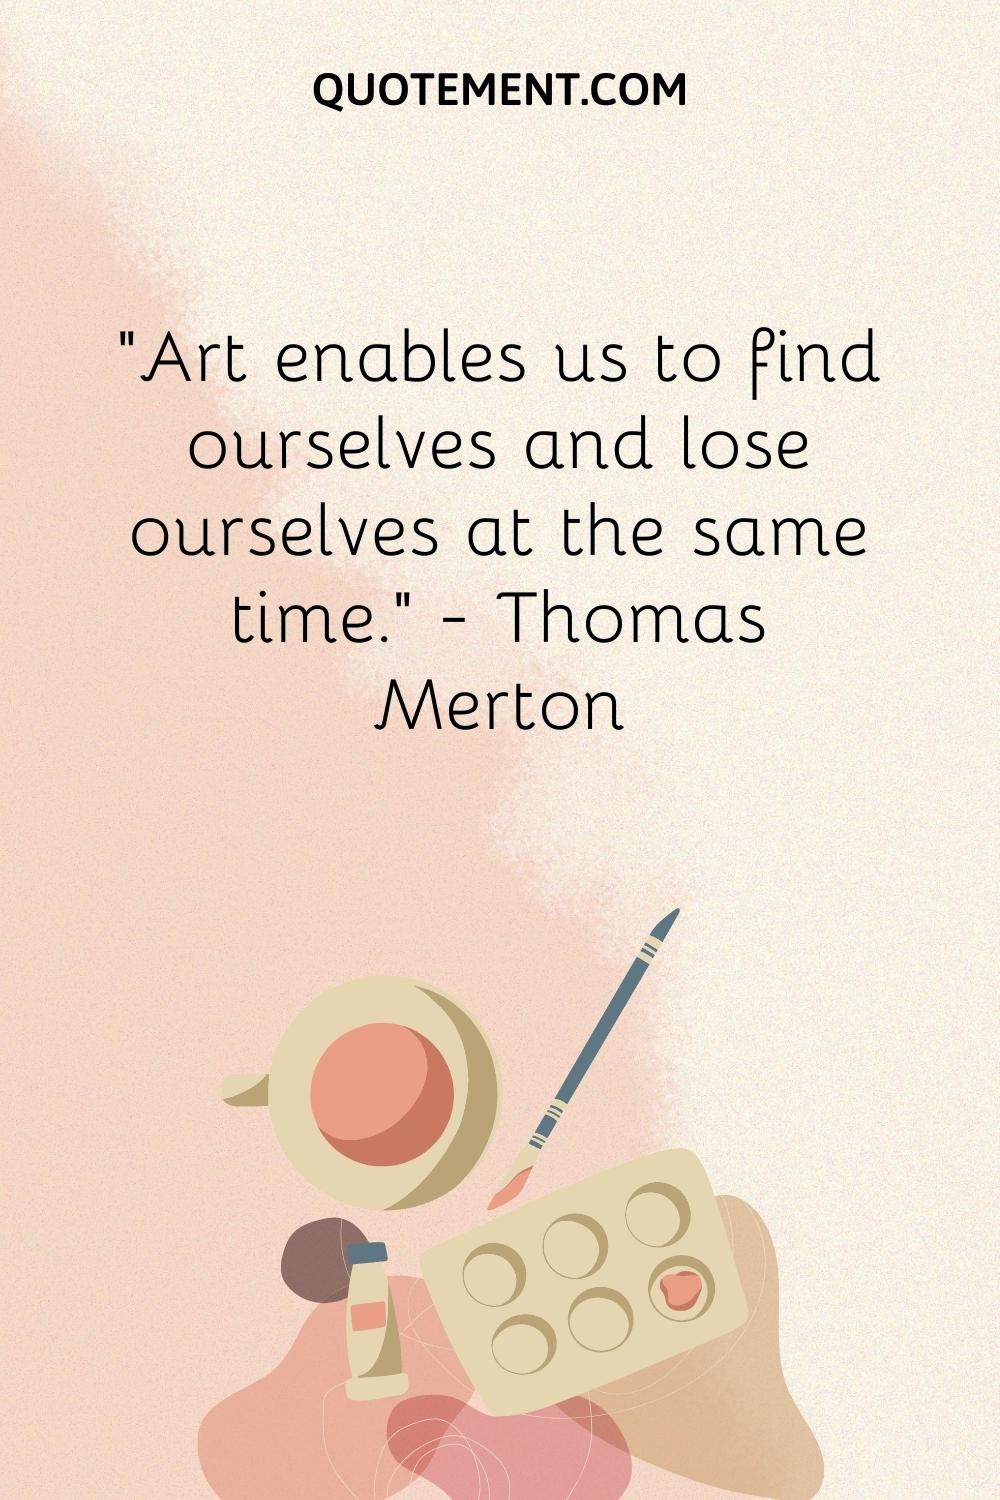 Art enables us to find ourselves and lose ourselves at the same time